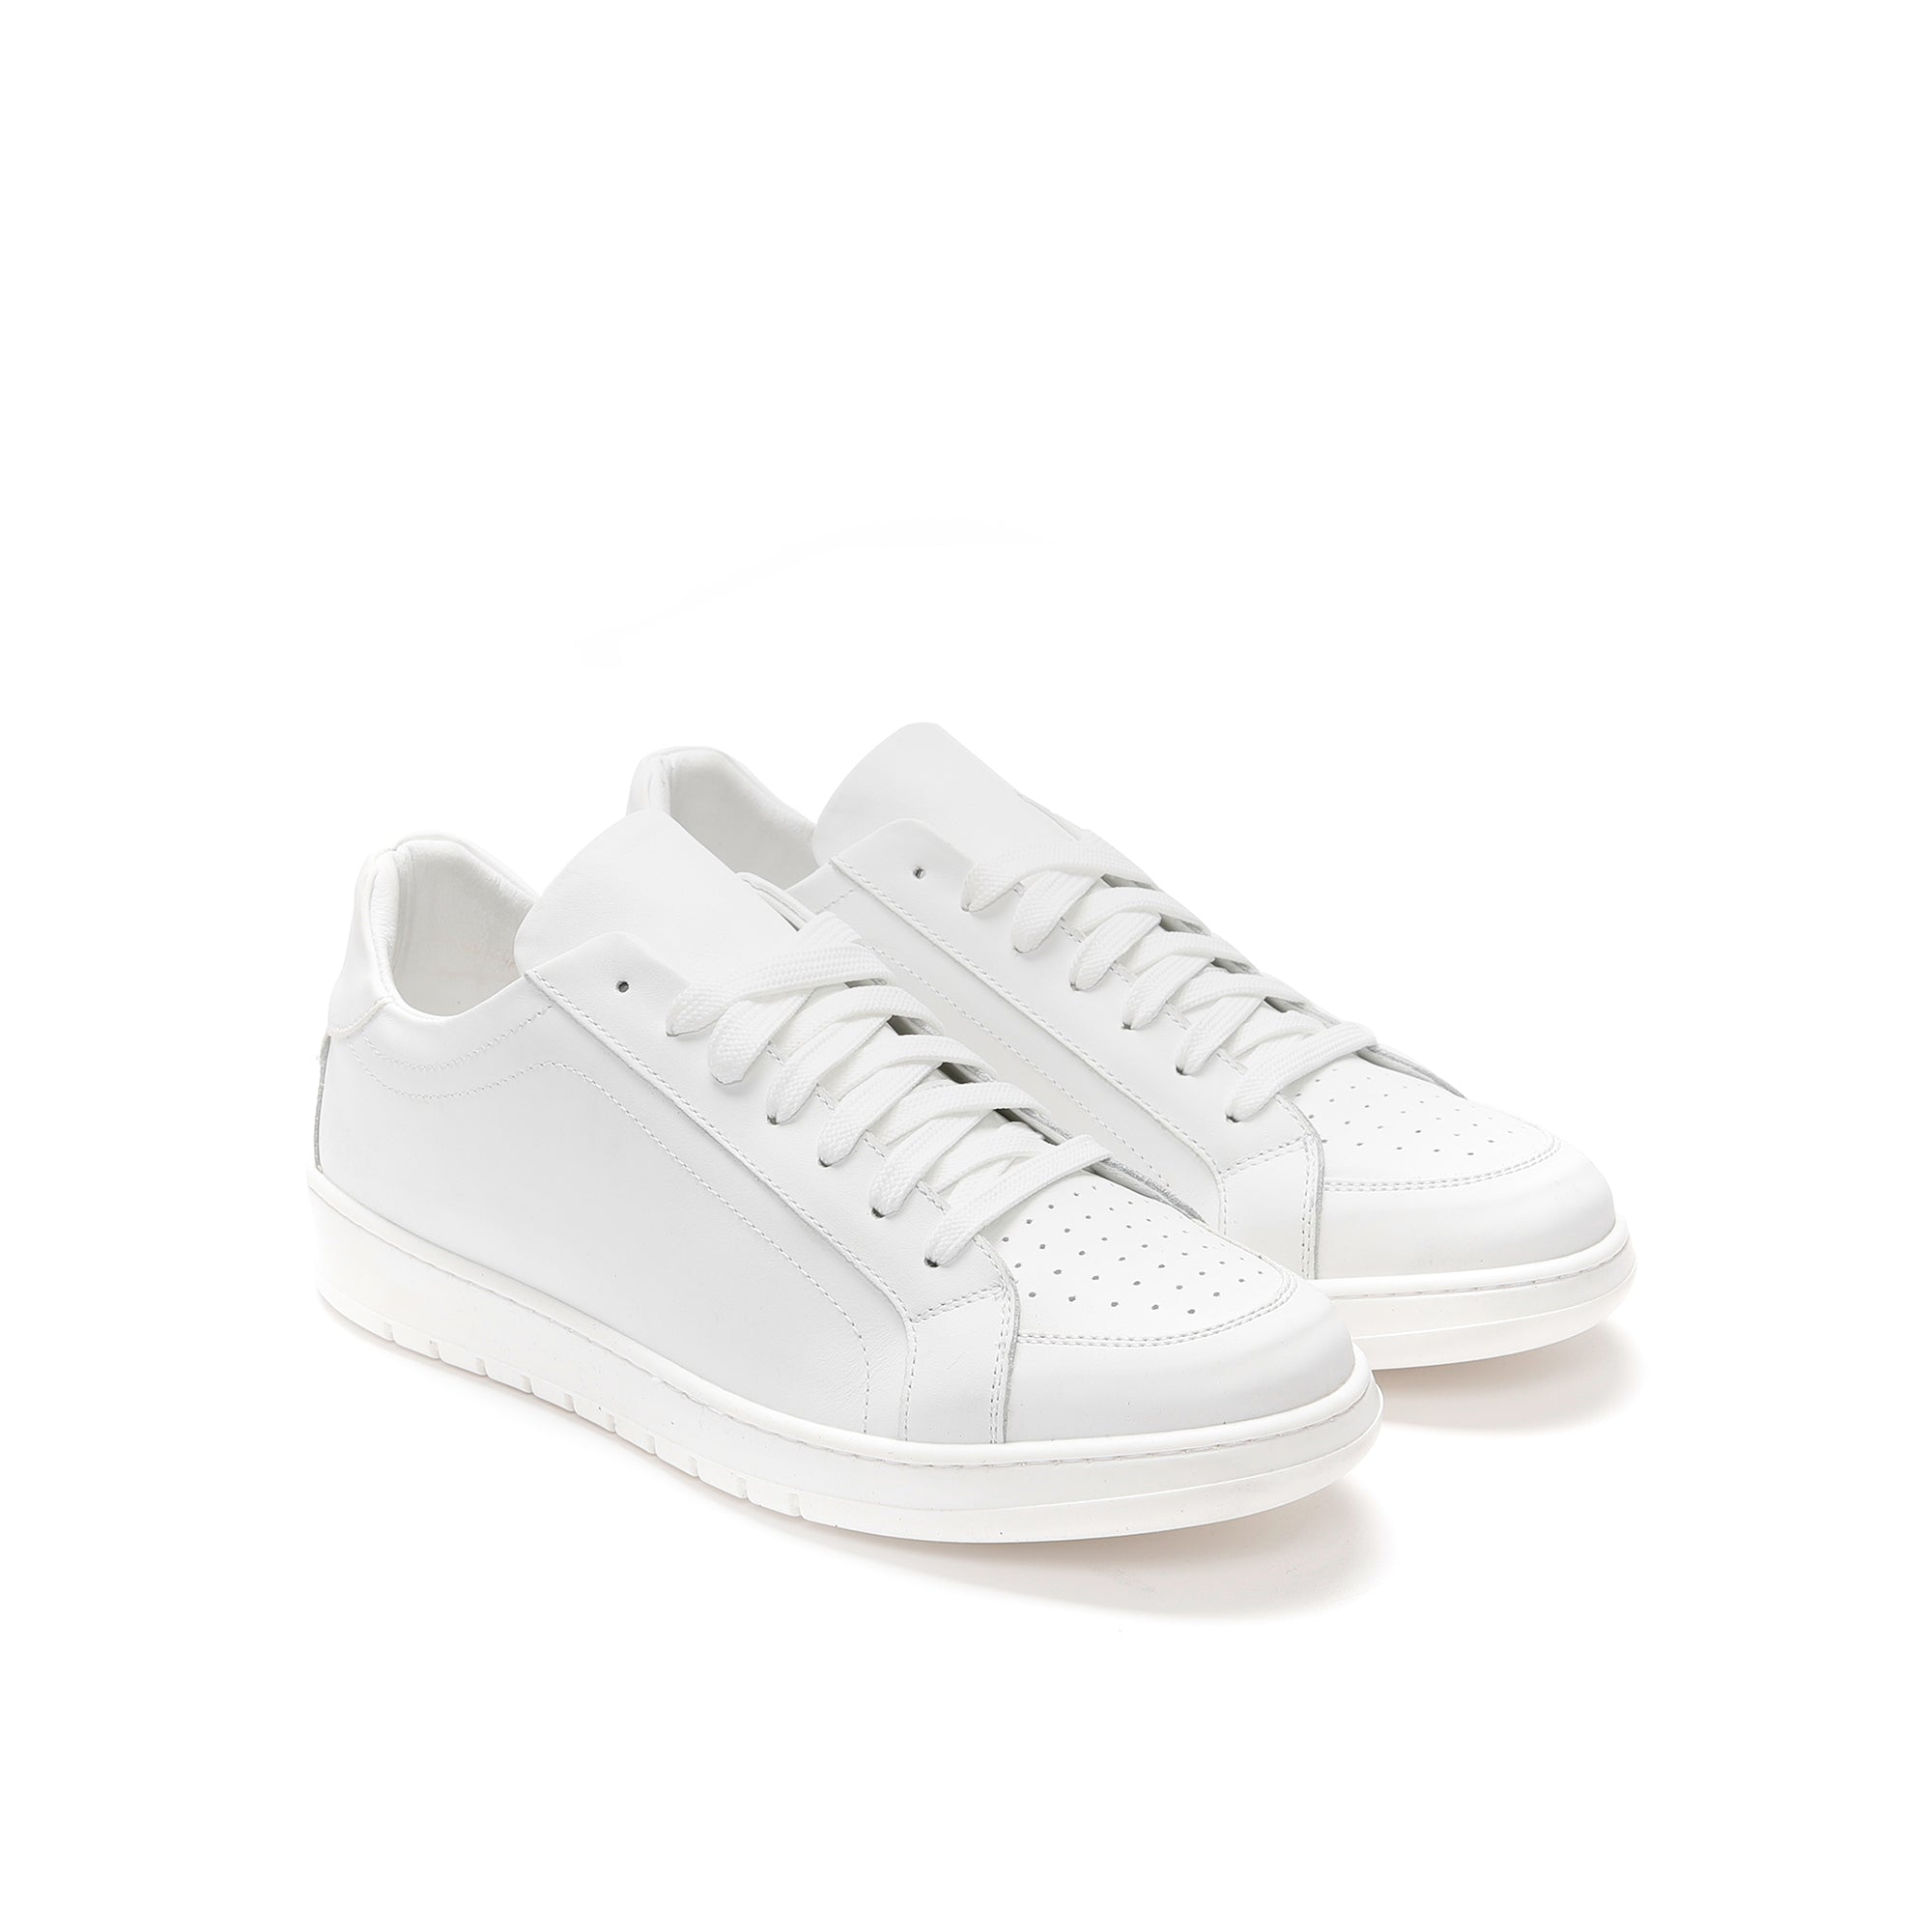 Lace-Up sneaker white